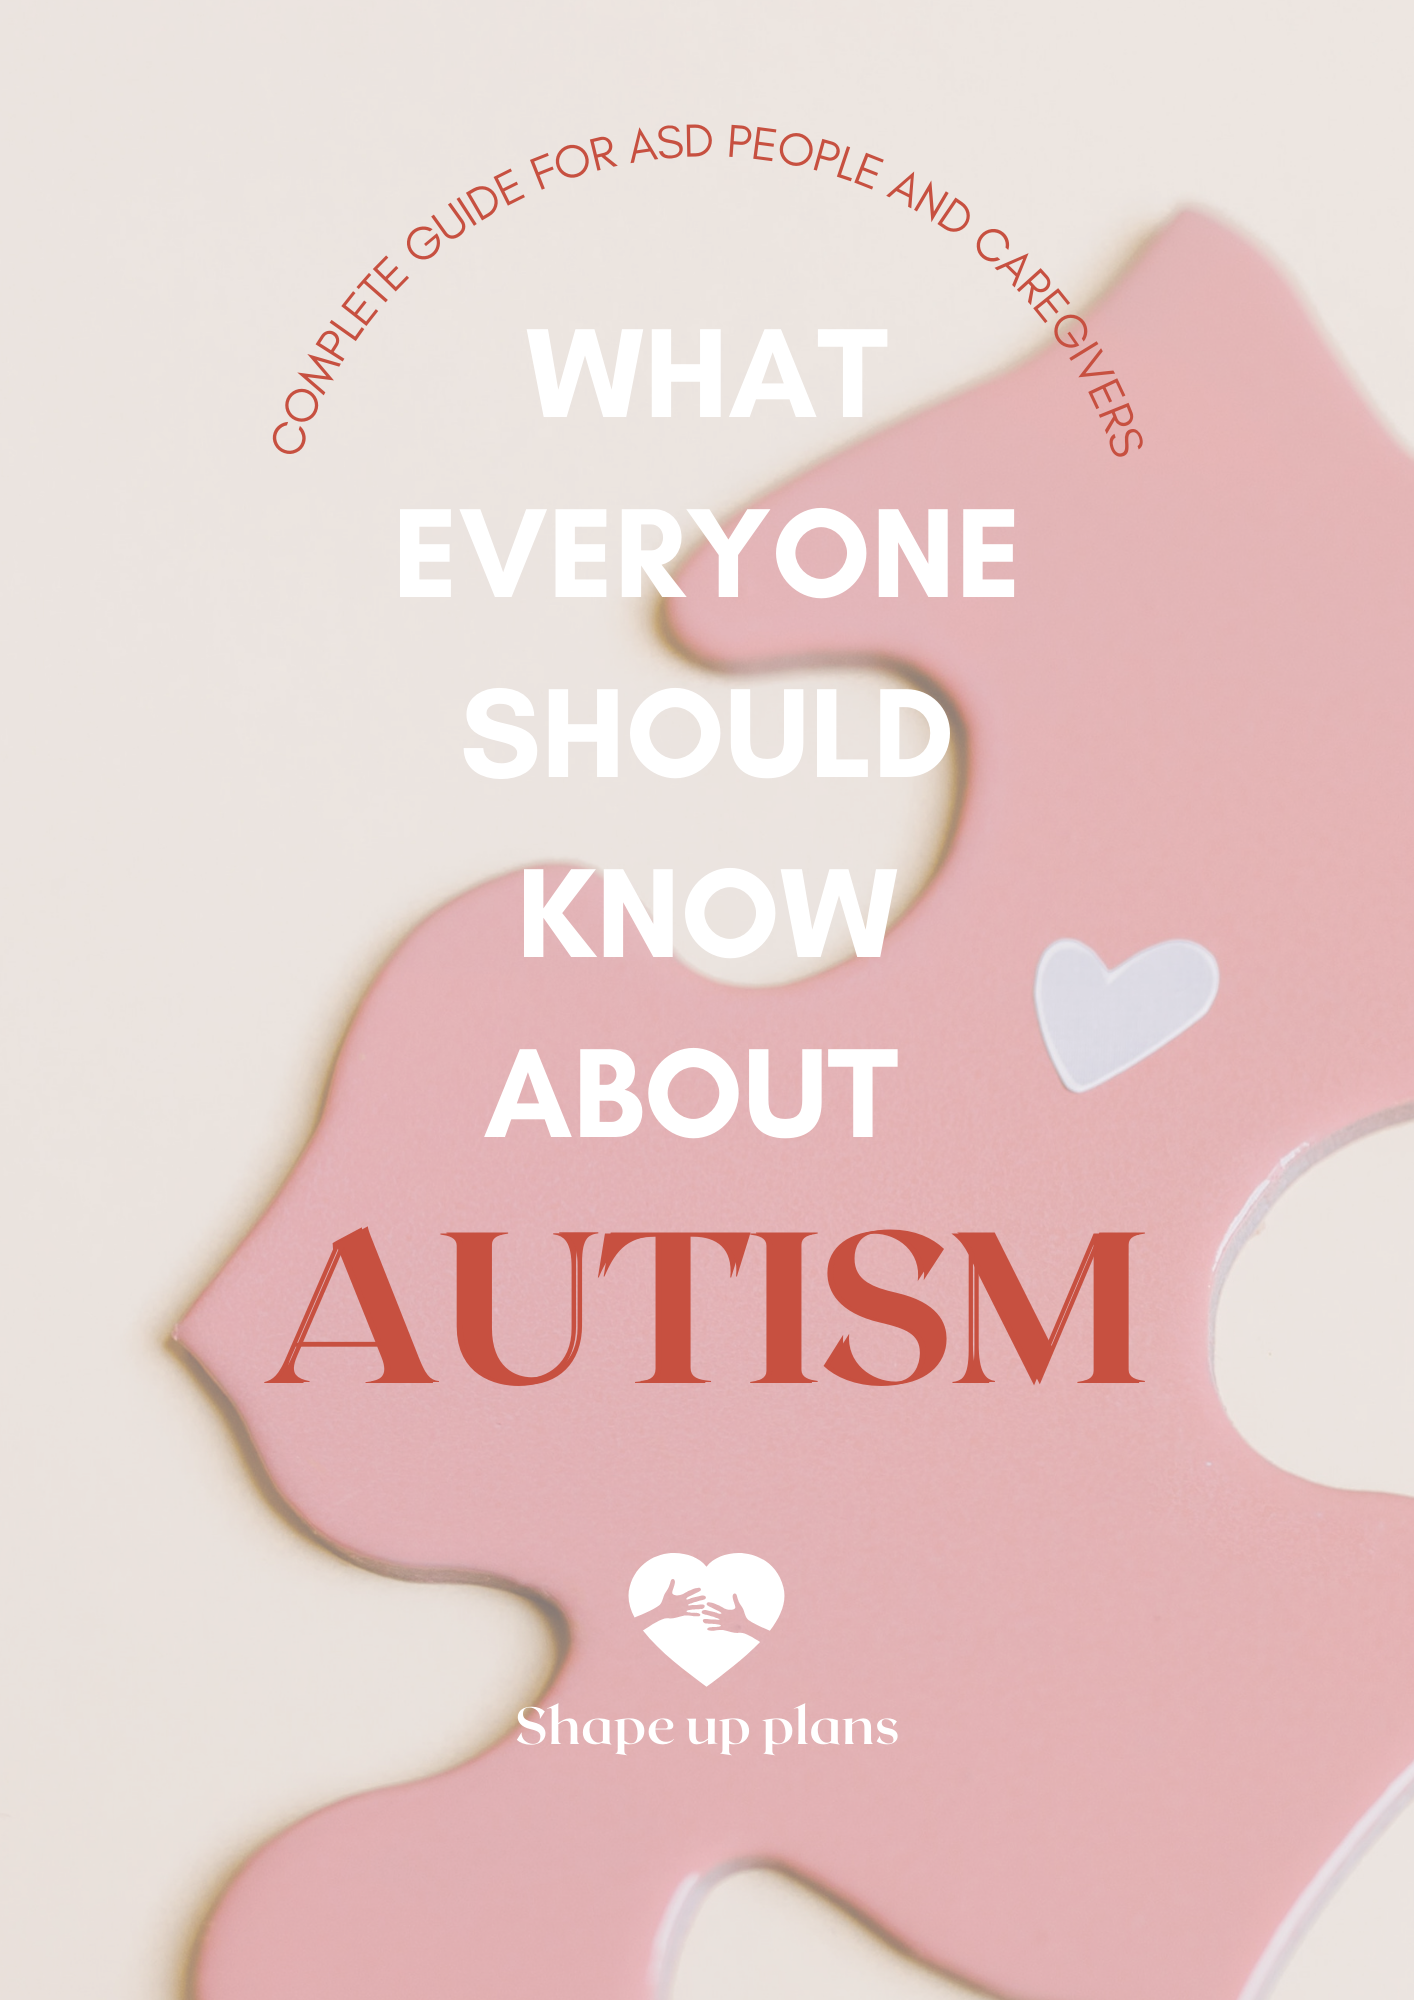 Autism Guide For ASD People and Caregivers: What everyone should know